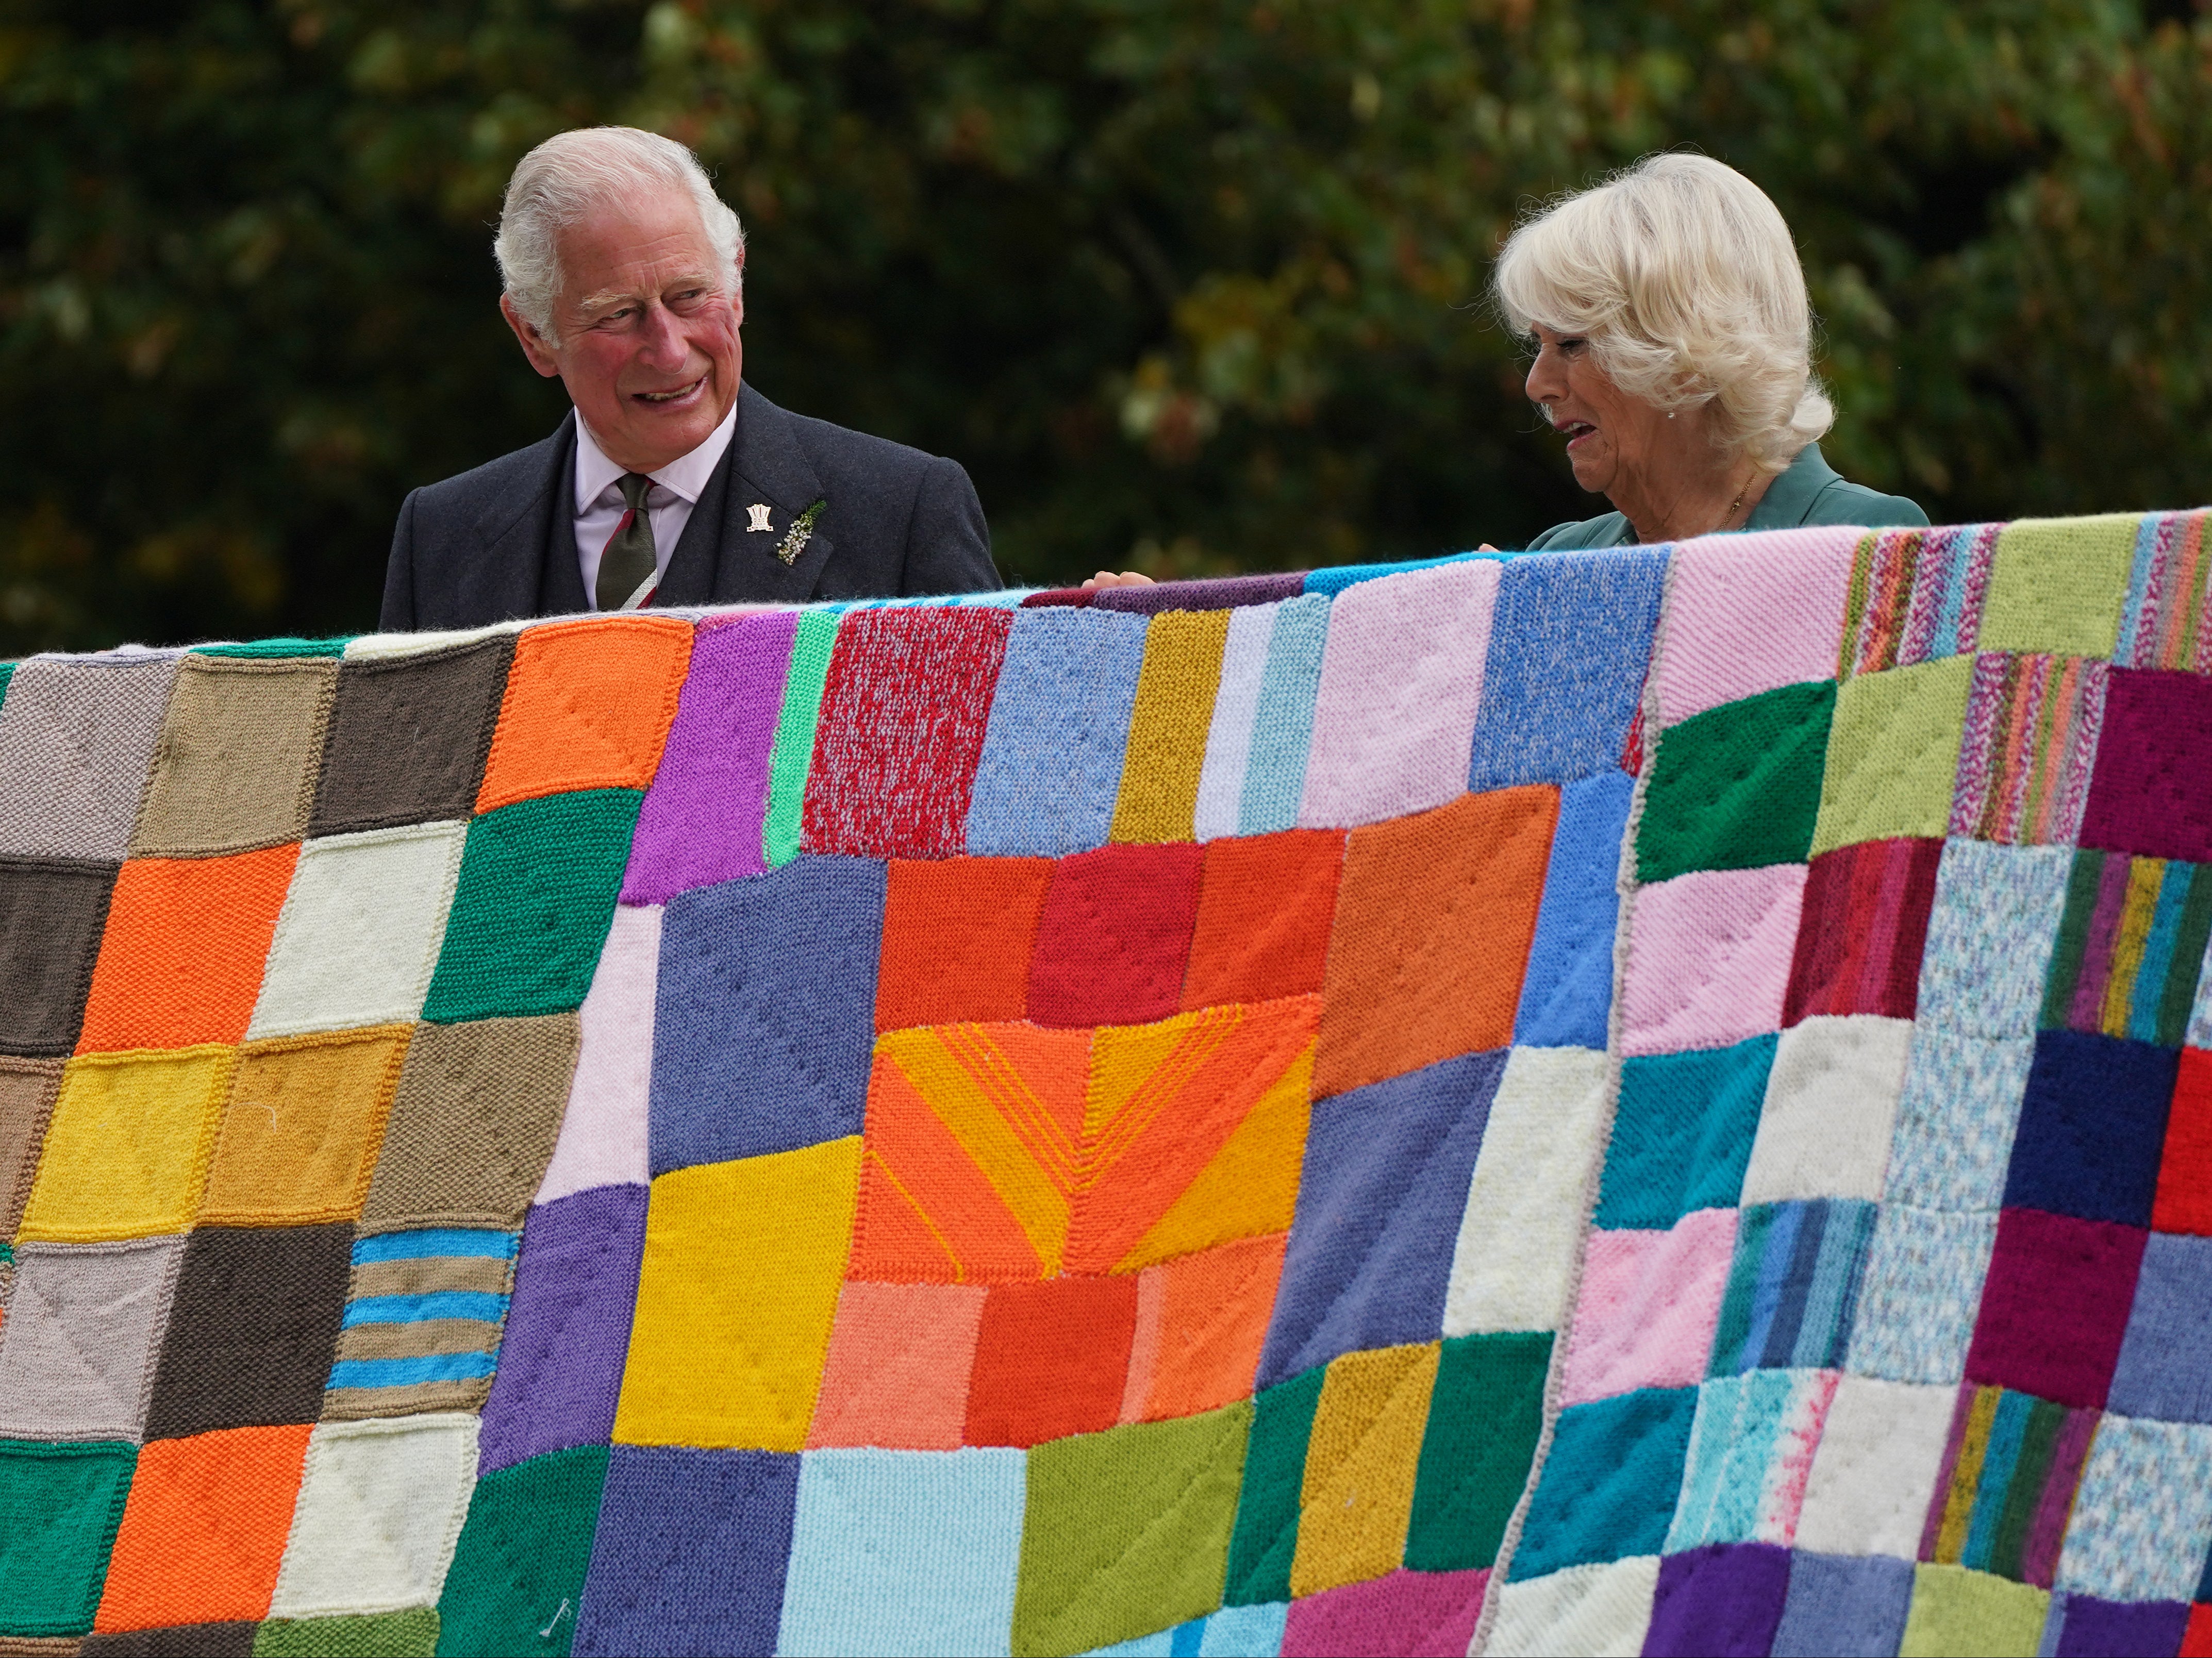 The Prince of Wales and the Duchess of Cornwall during a visit to Scotland to promote The Prince’s Foundation